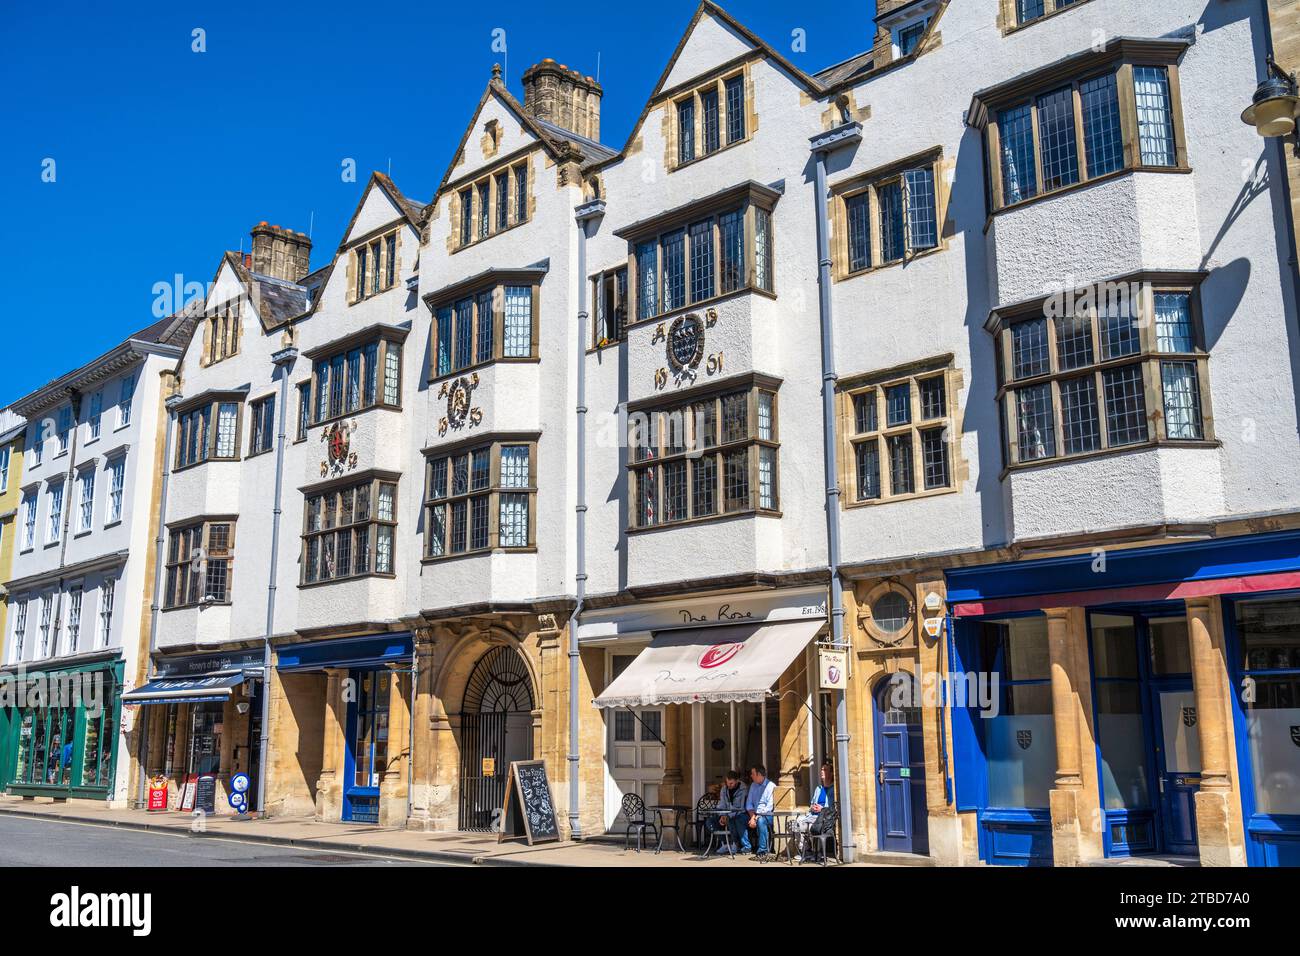 The Rose Tearoom on the High Street (A420) a Oxford City Centre, Oxfordshire, Inghilterra, Regno Unito Foto Stock